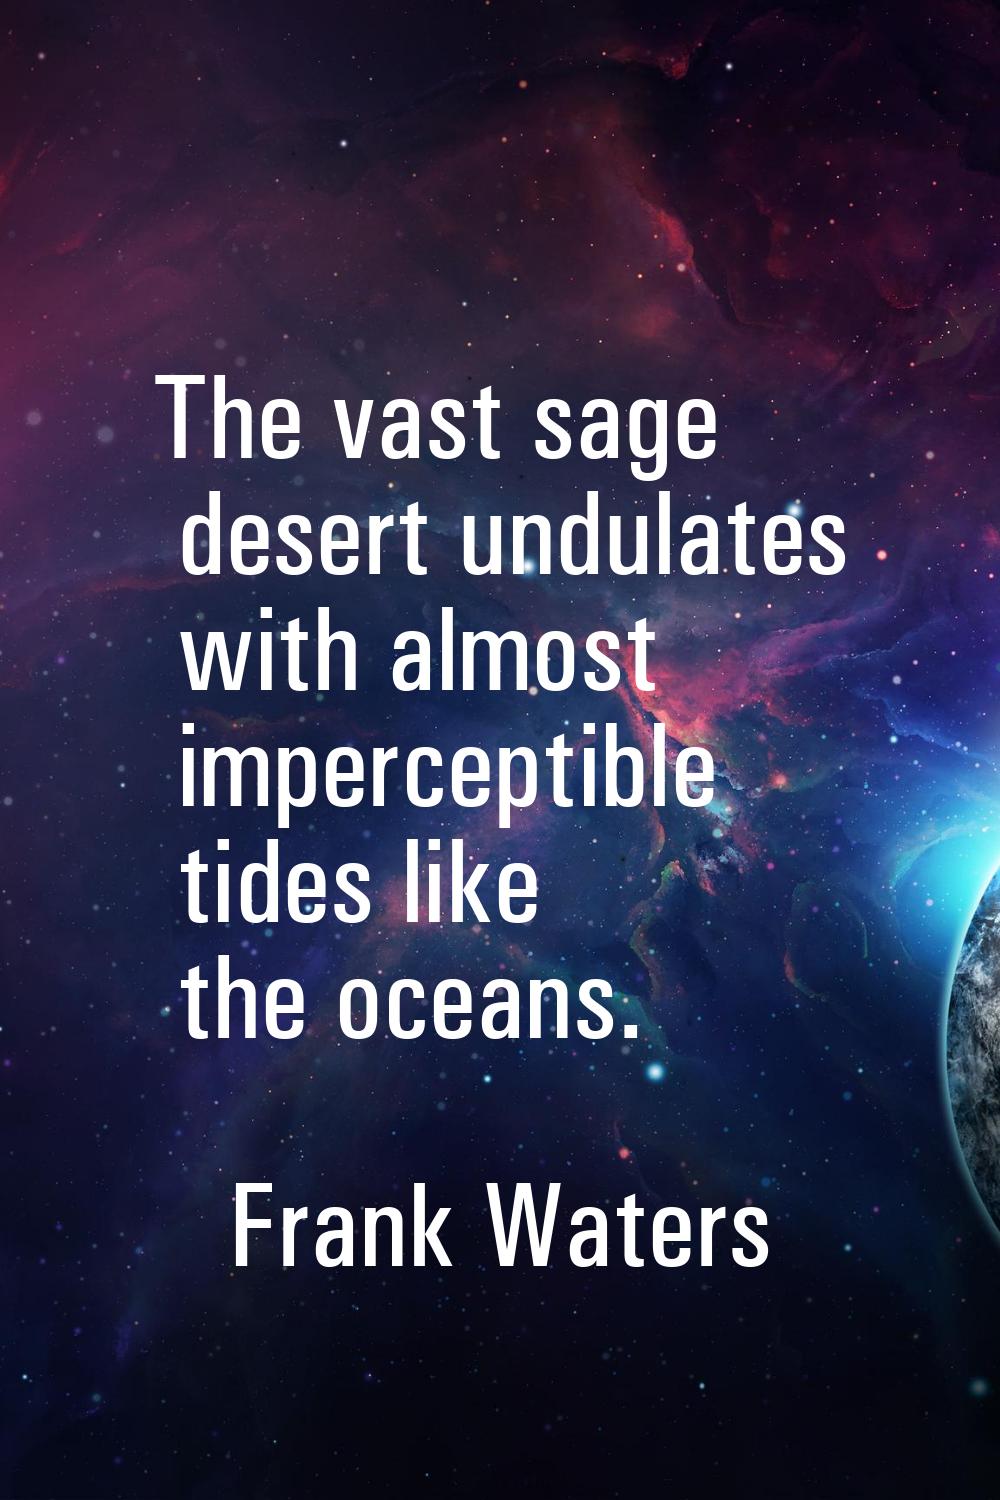 The vast sage desert undulates with almost imperceptible tides like the oceans.